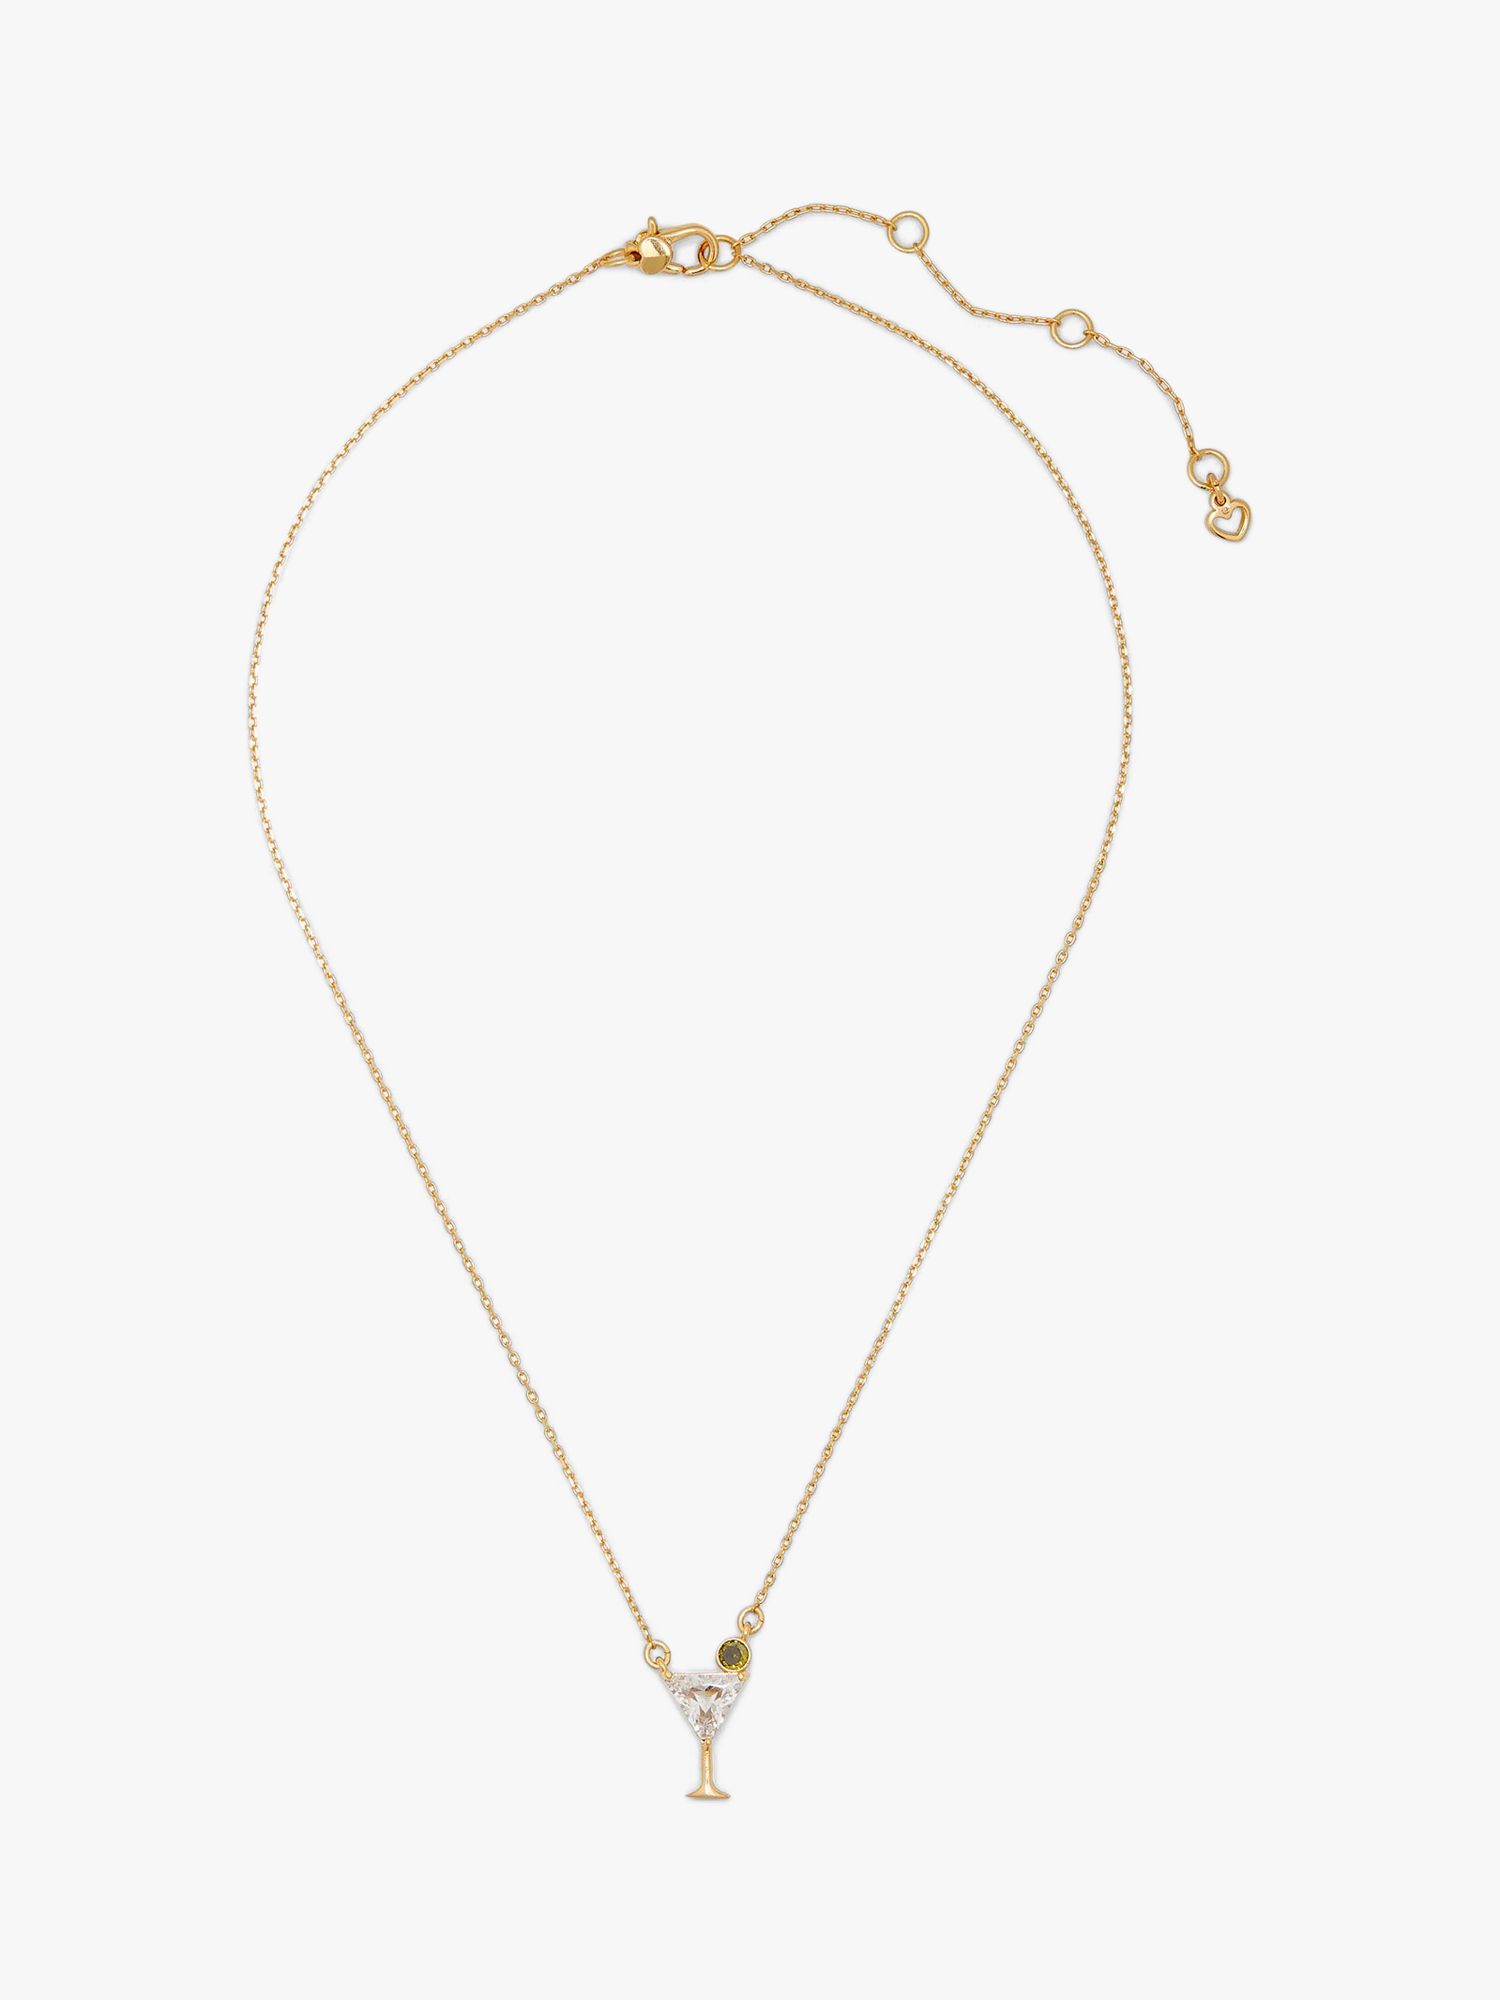 kate spade new york Cocktail Cubic Zirconia Pendant Necklace, Gold